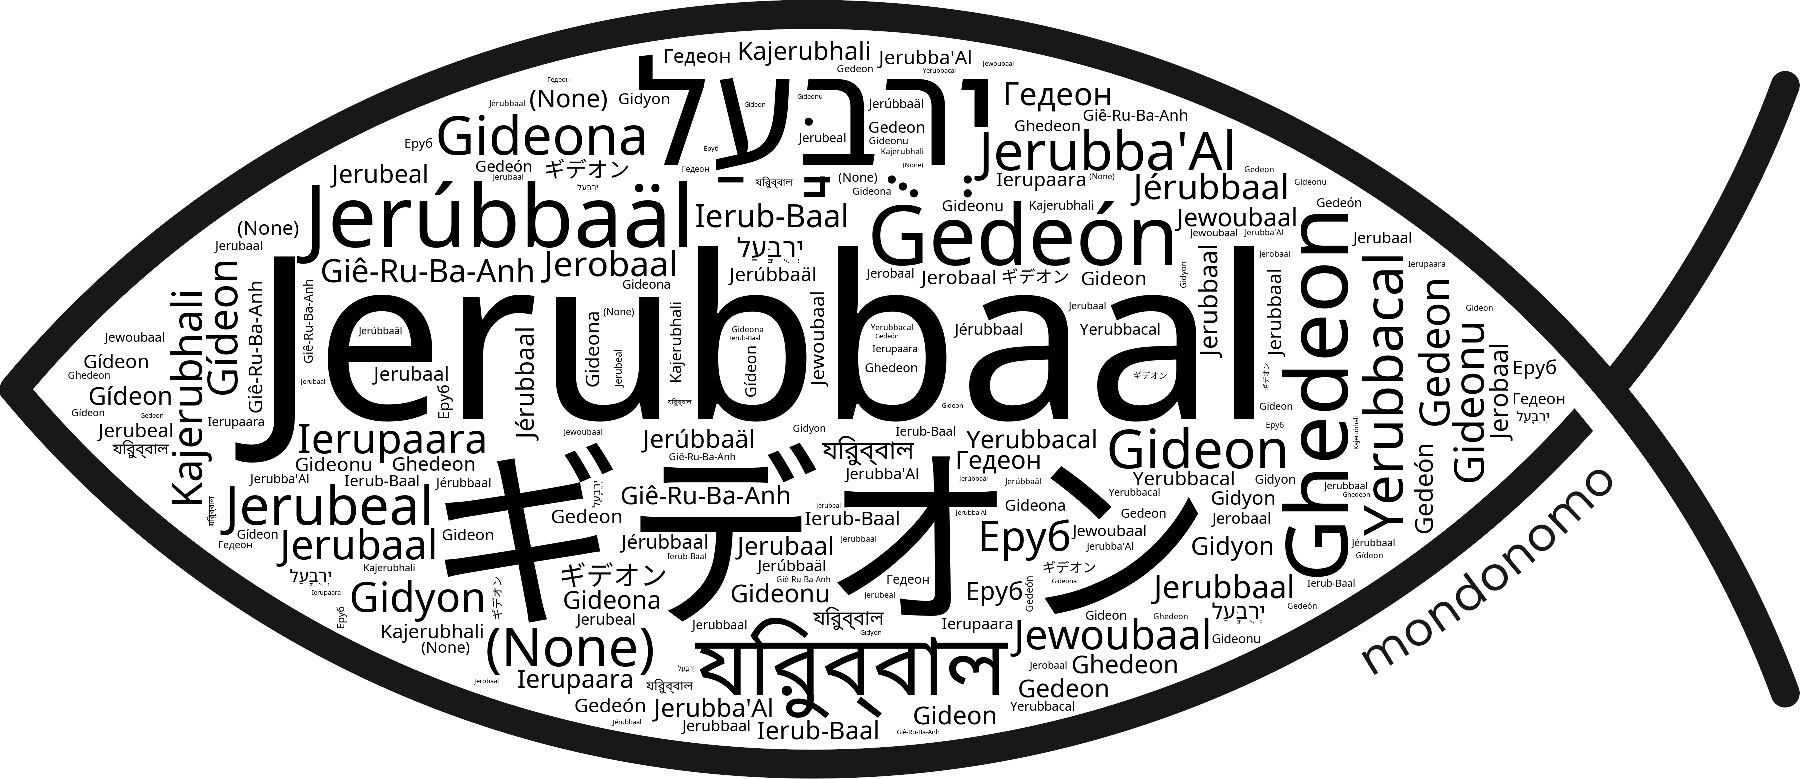 Name Jerubbaal in the world's Bibles